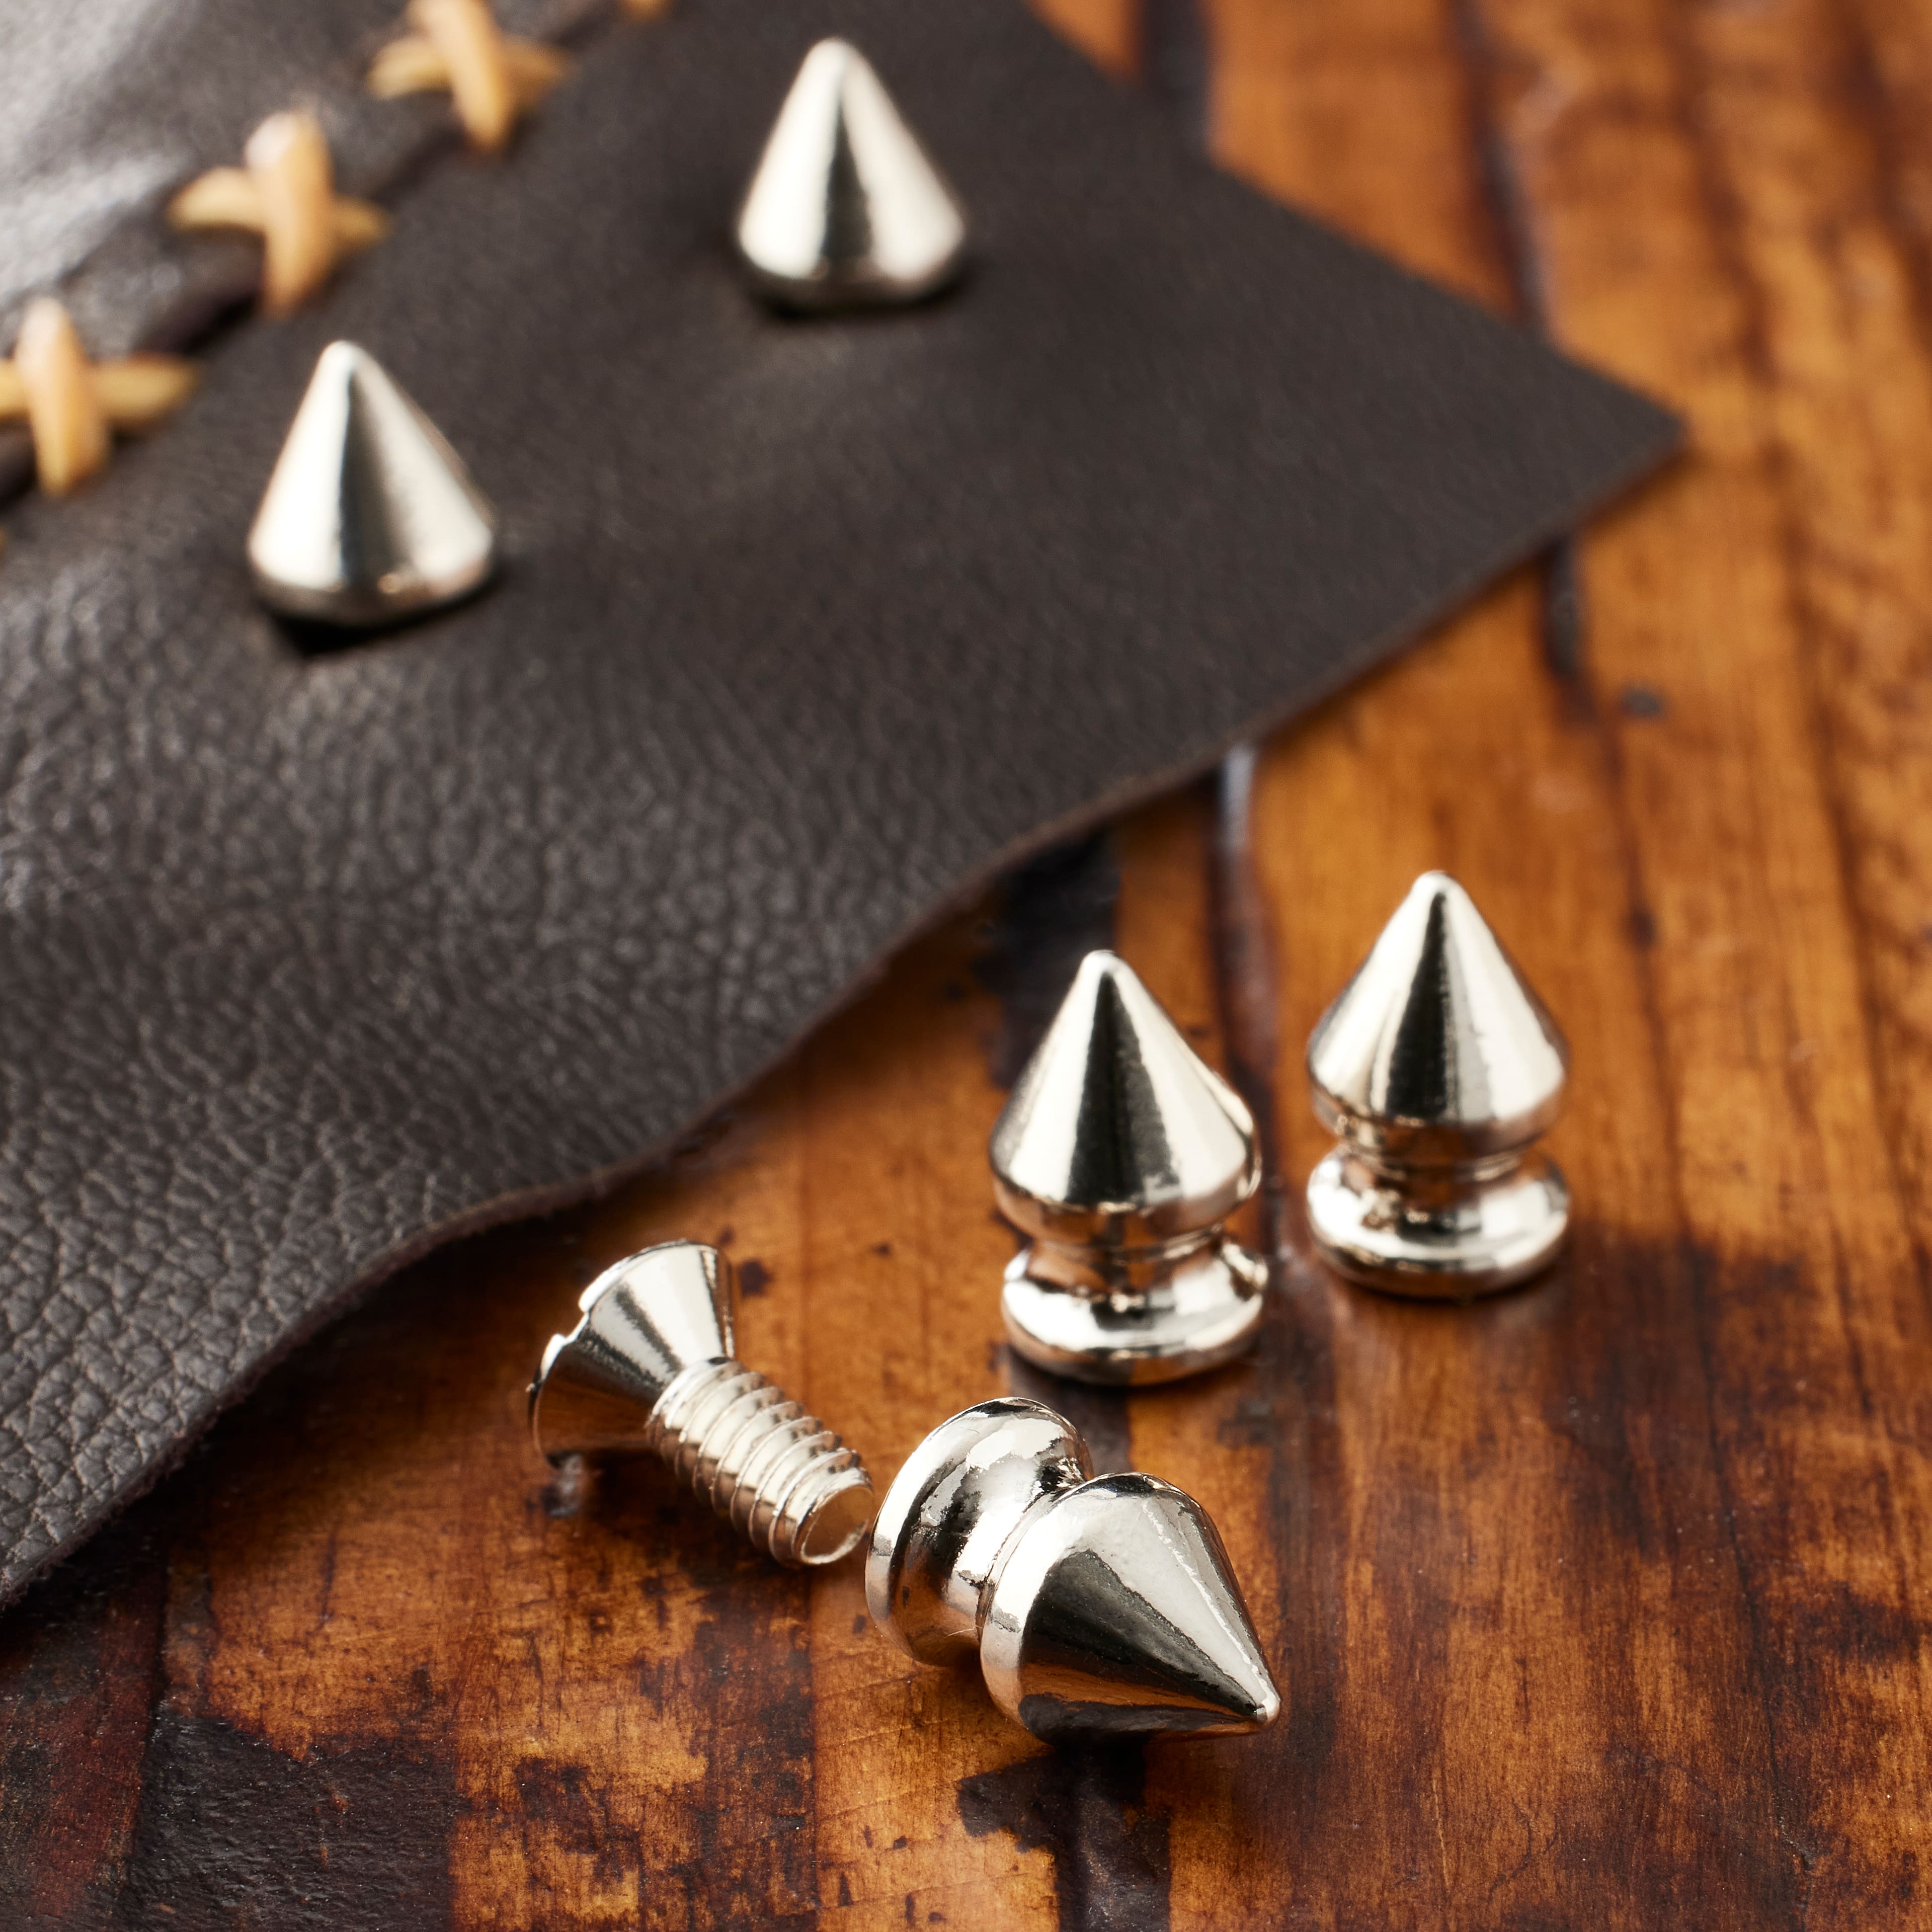 Leather Bullet Spikes, Studs Spikes Clothes, Screw Rivets Leather